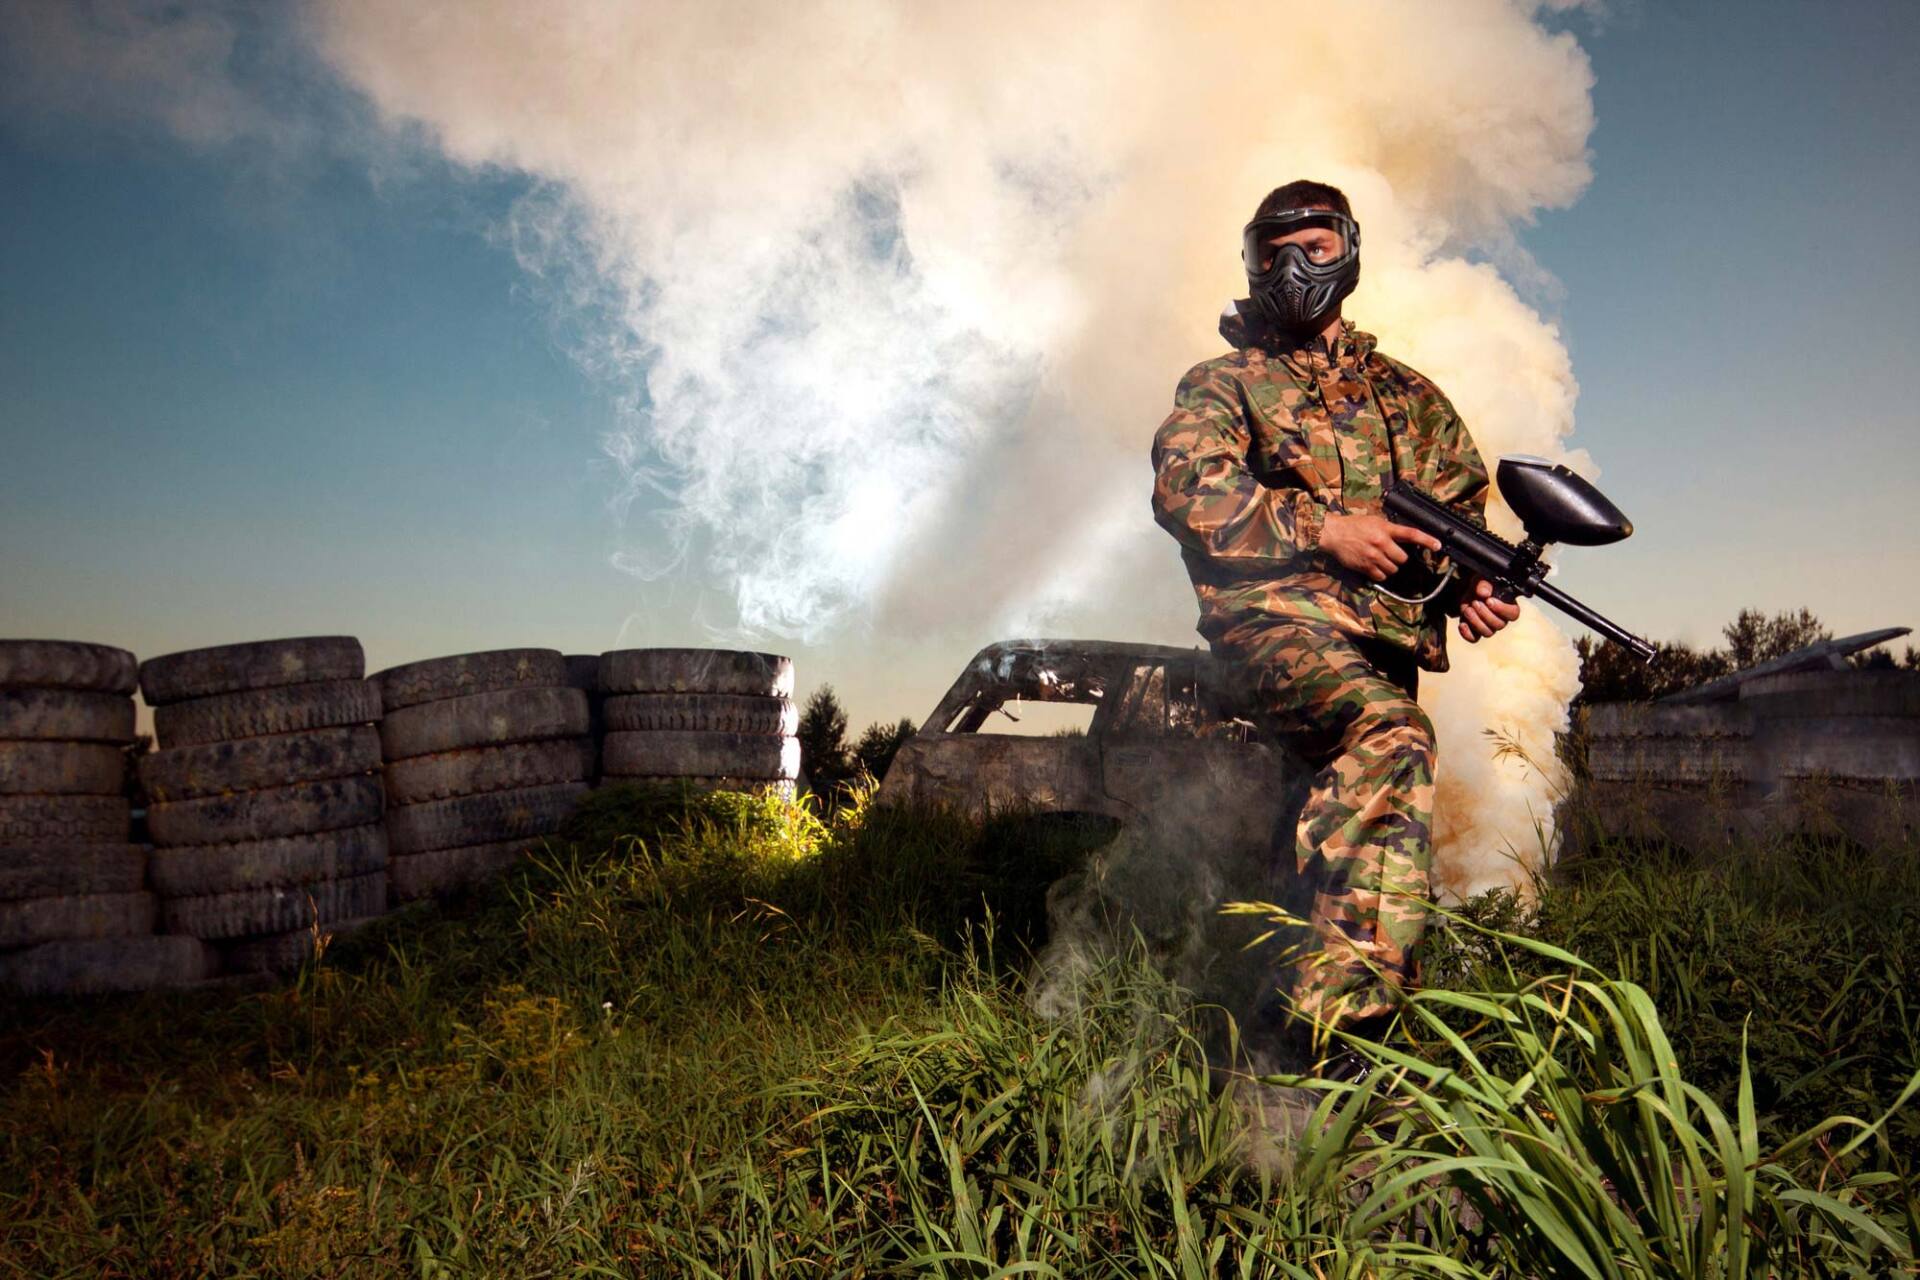 tyres, smoke and a person with paintball full gear on